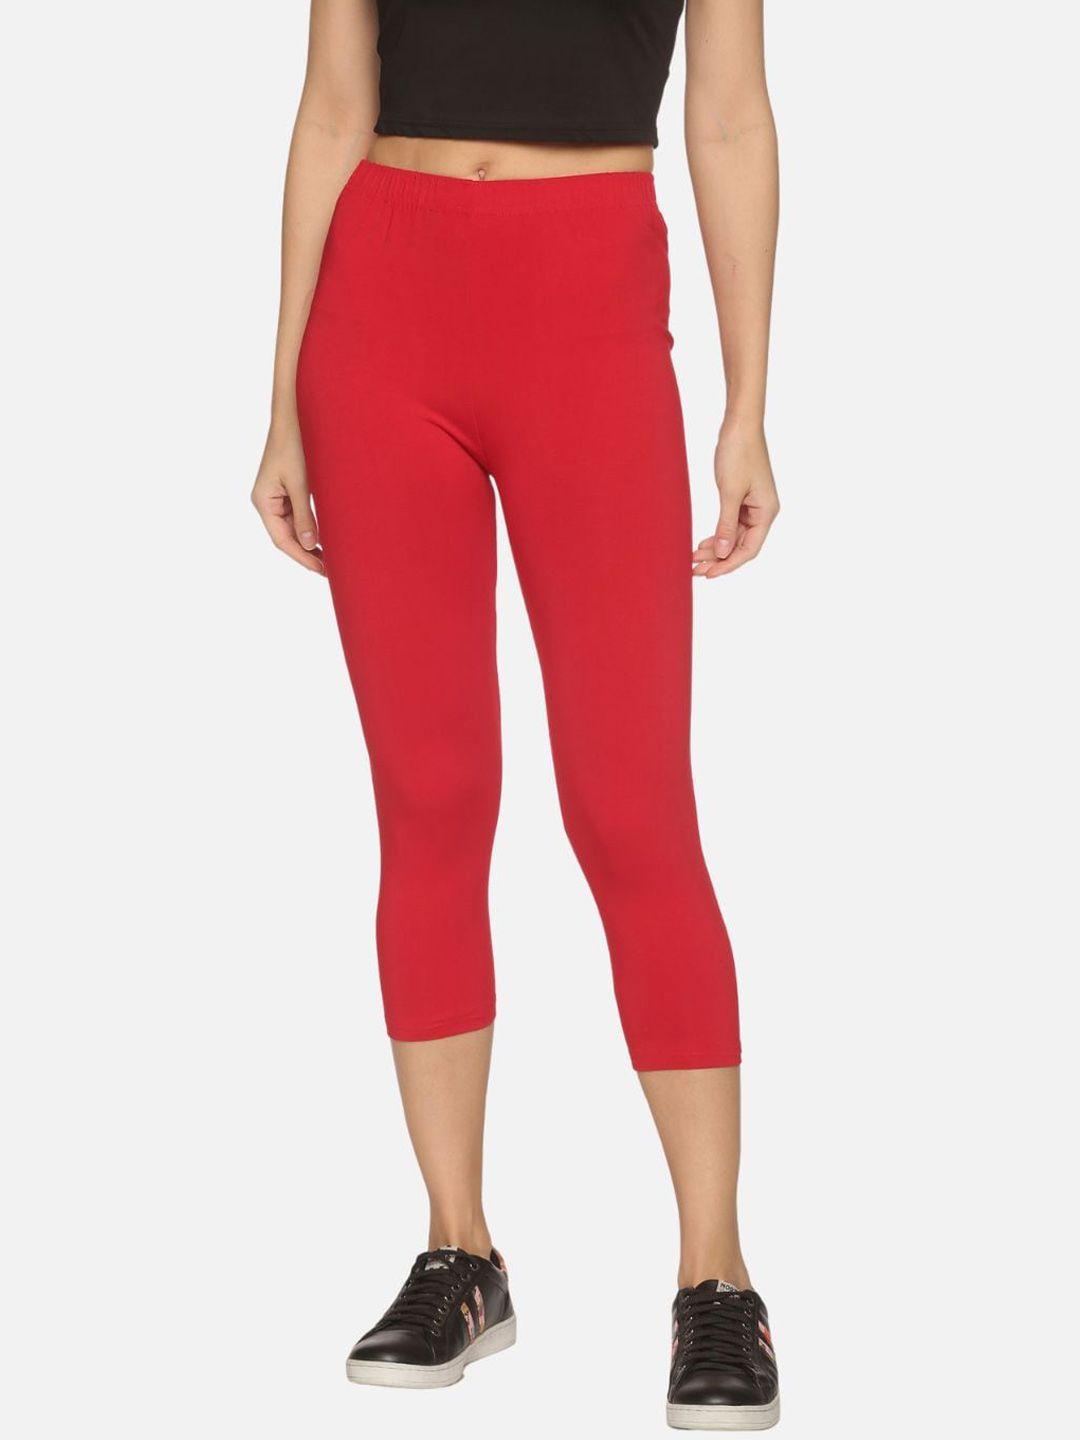 outflits women red solid skinny-fit capris length leggings